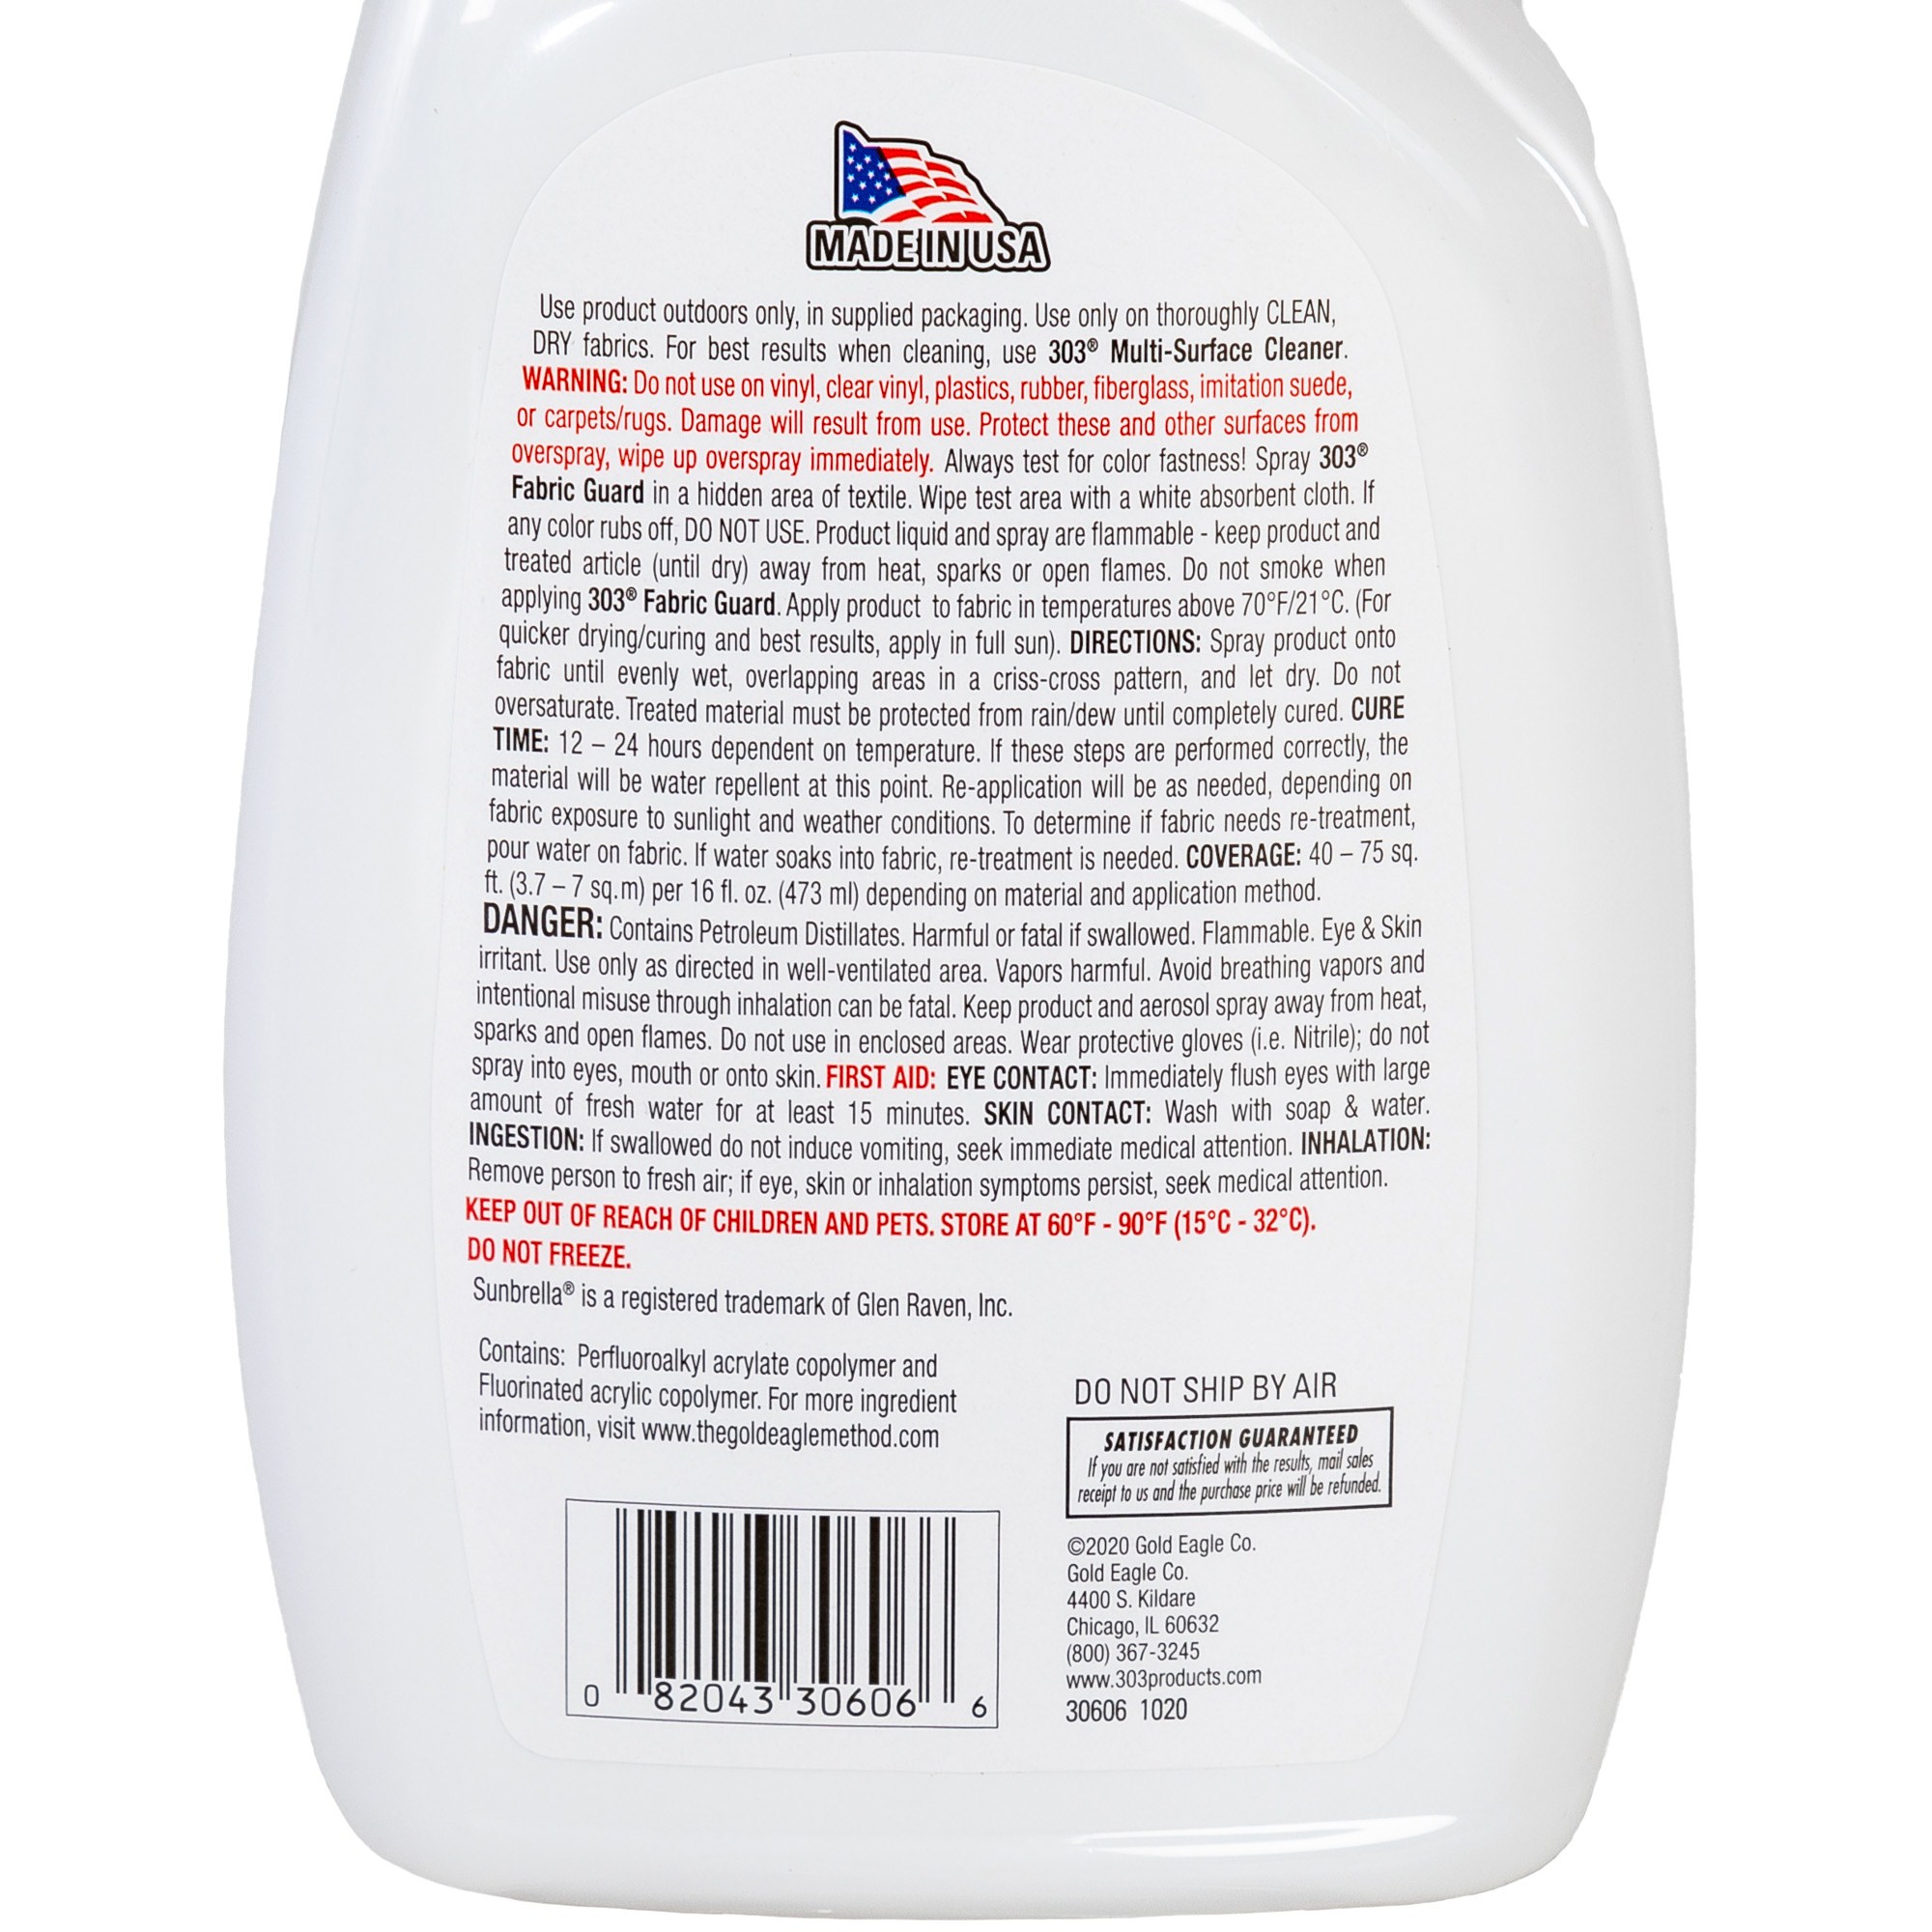 303 Stain Guard Spray for Indoor Fabrics